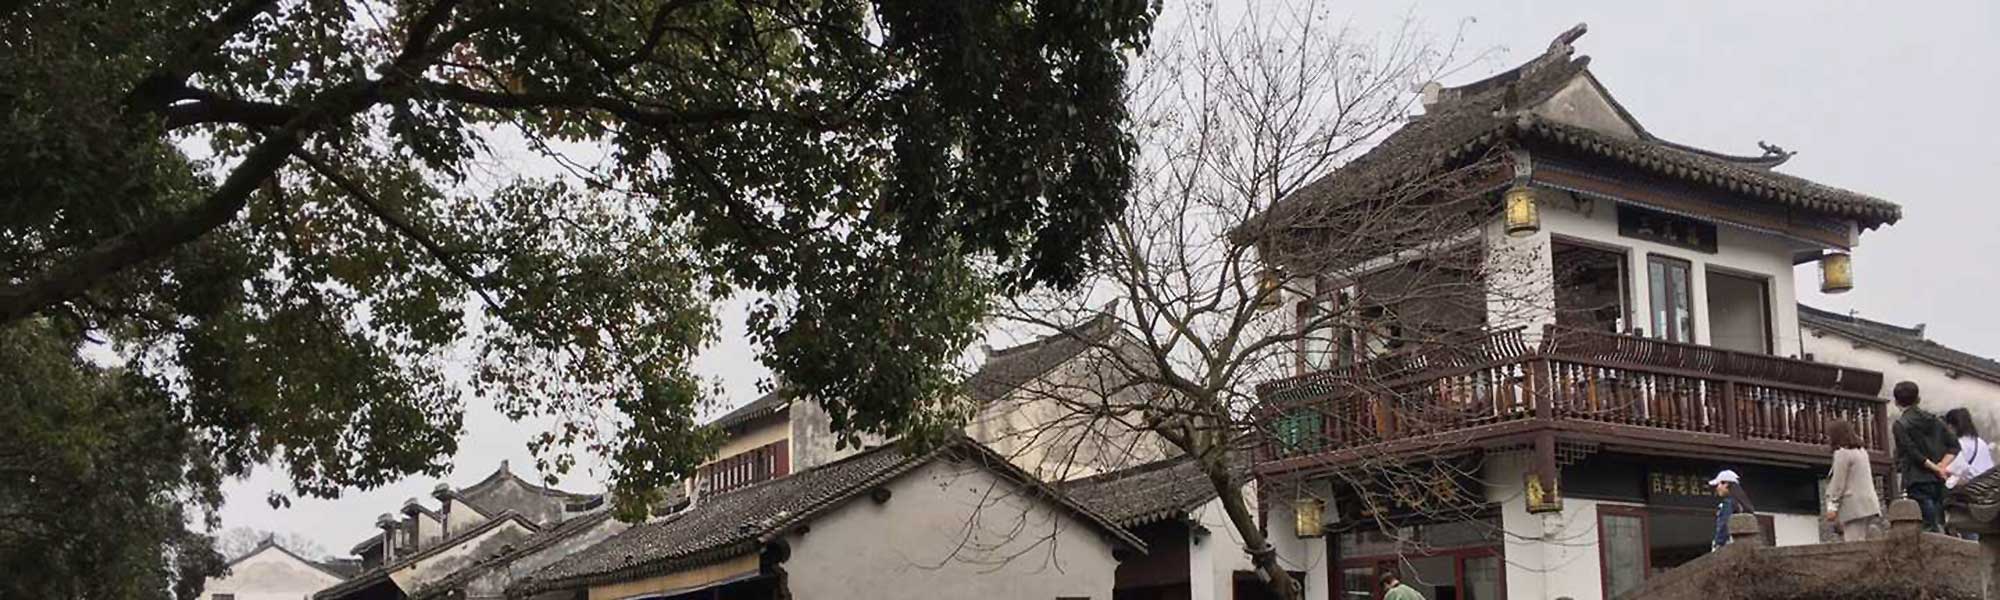 A Chinese building and some trees